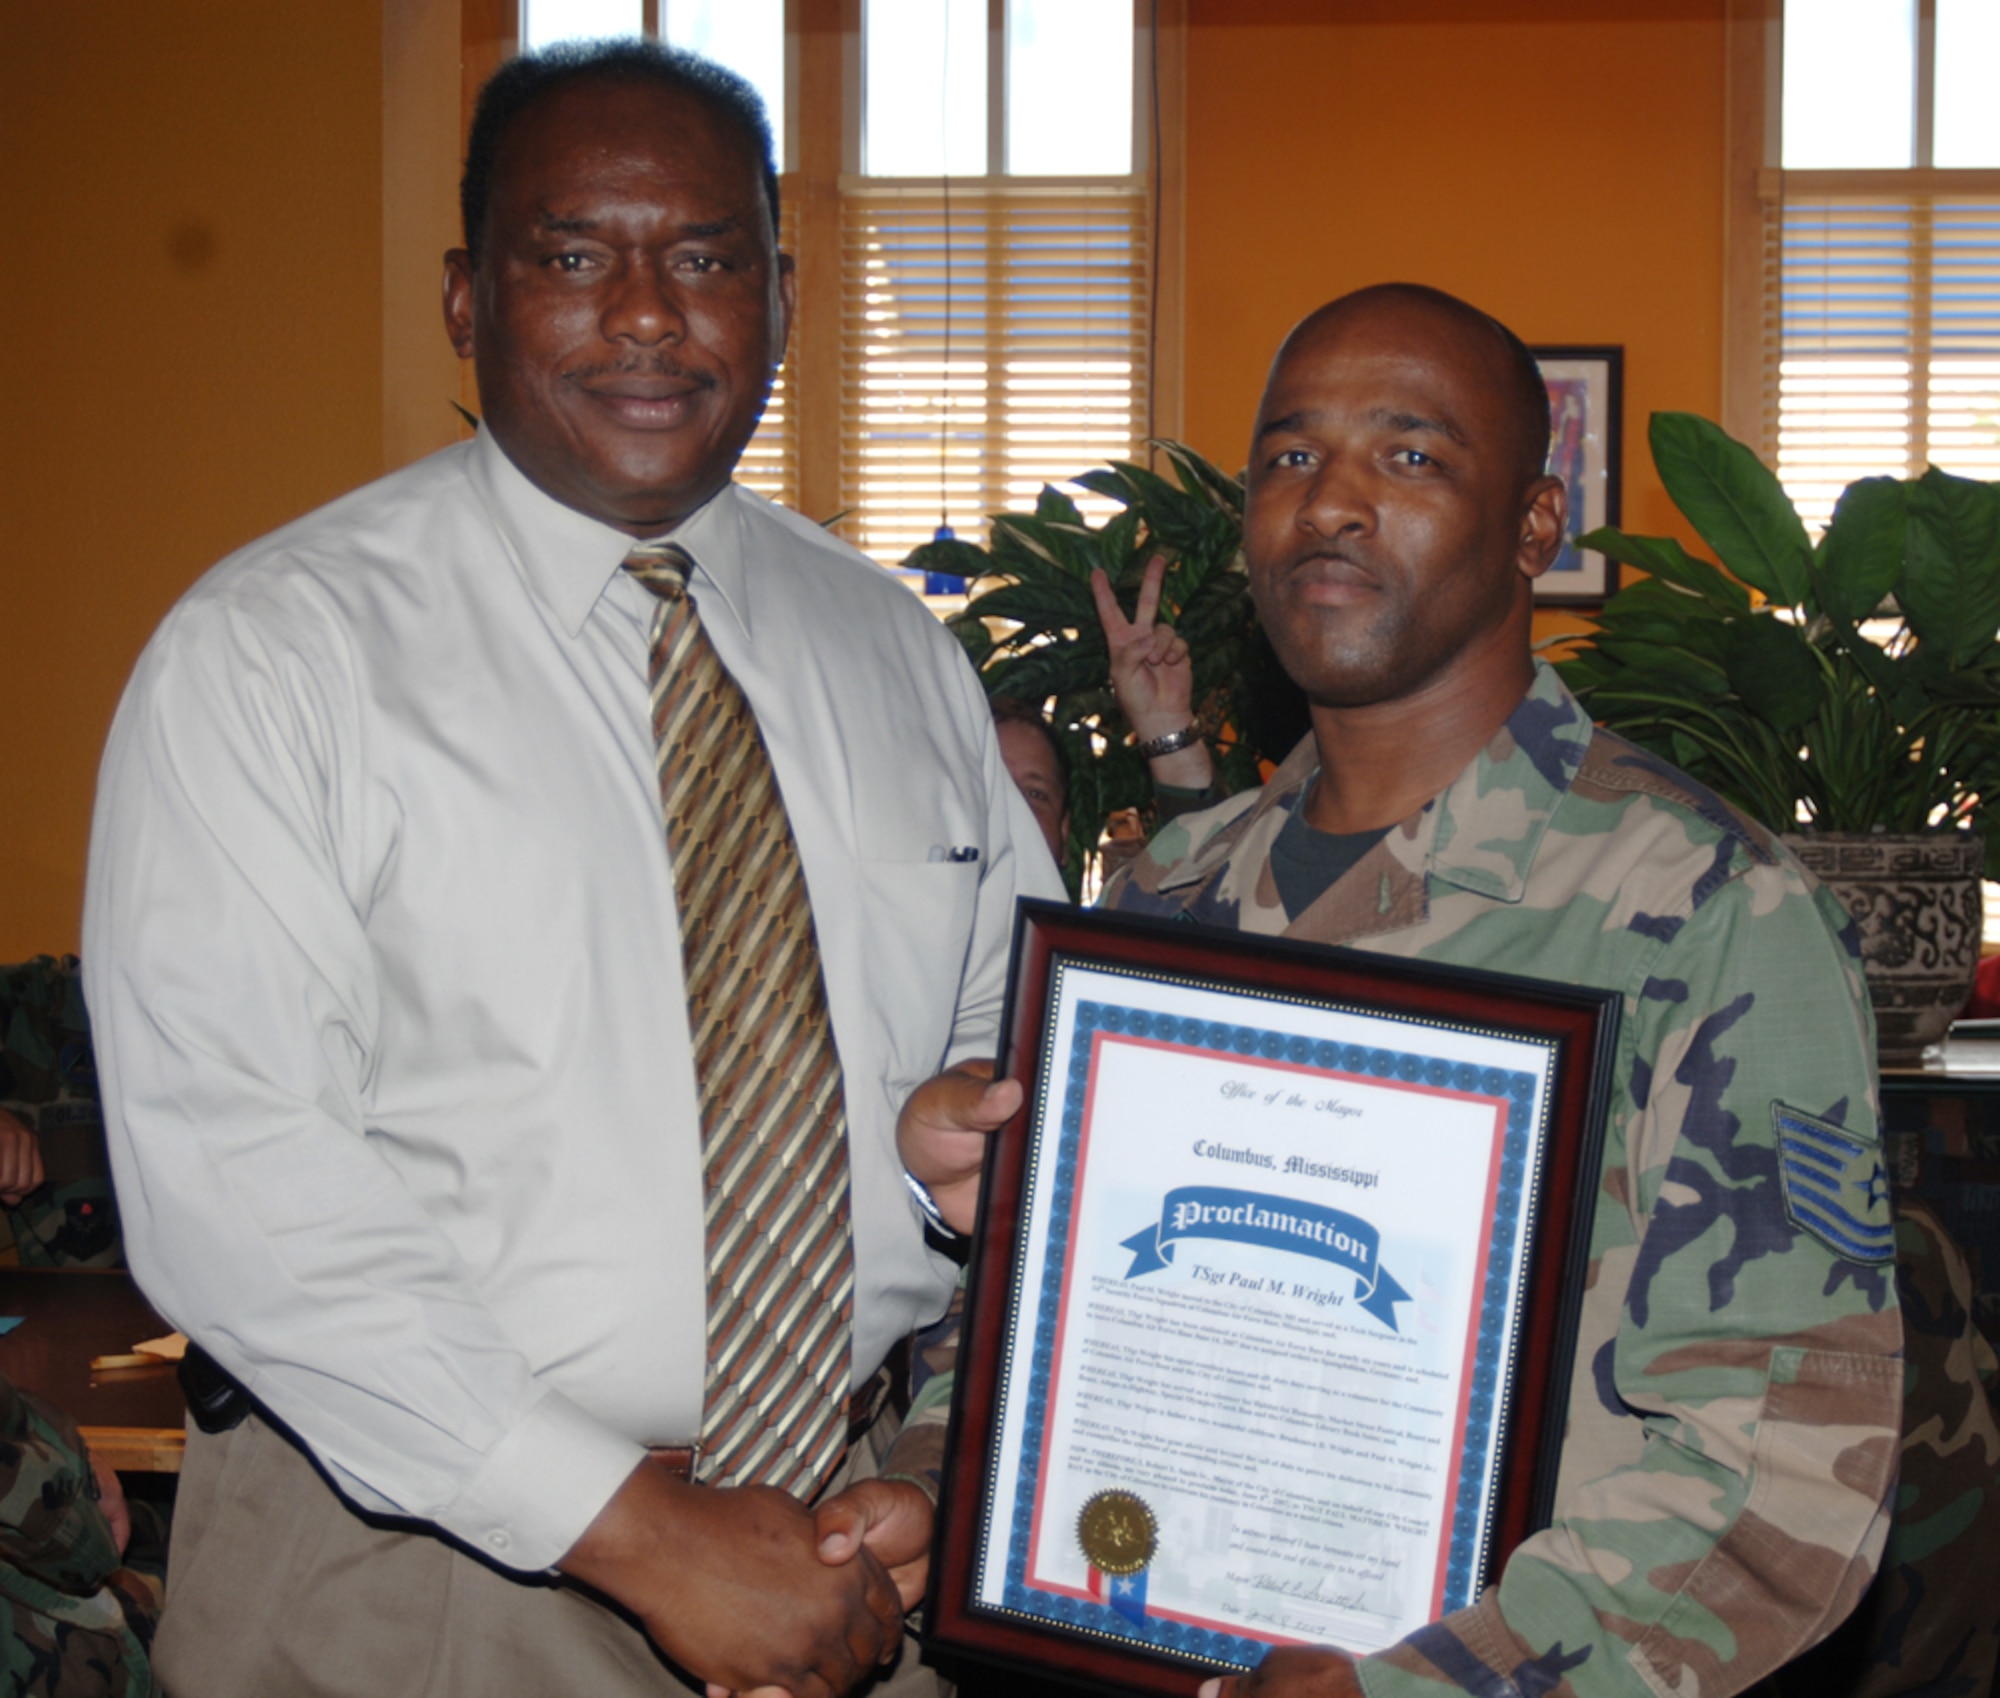 Technical Sgt. Paul Wright, 14th Security Forces Squadron, receives a proclamation from the Honorable Robert Smith, Columbus Mayor, Friday at a luncheon at the Grill. Sergeant Wright was honored for his volunteer work both in the community and at CAFB. (U.S. Air Force Photo by Airman 1st Class Danielle Powell)